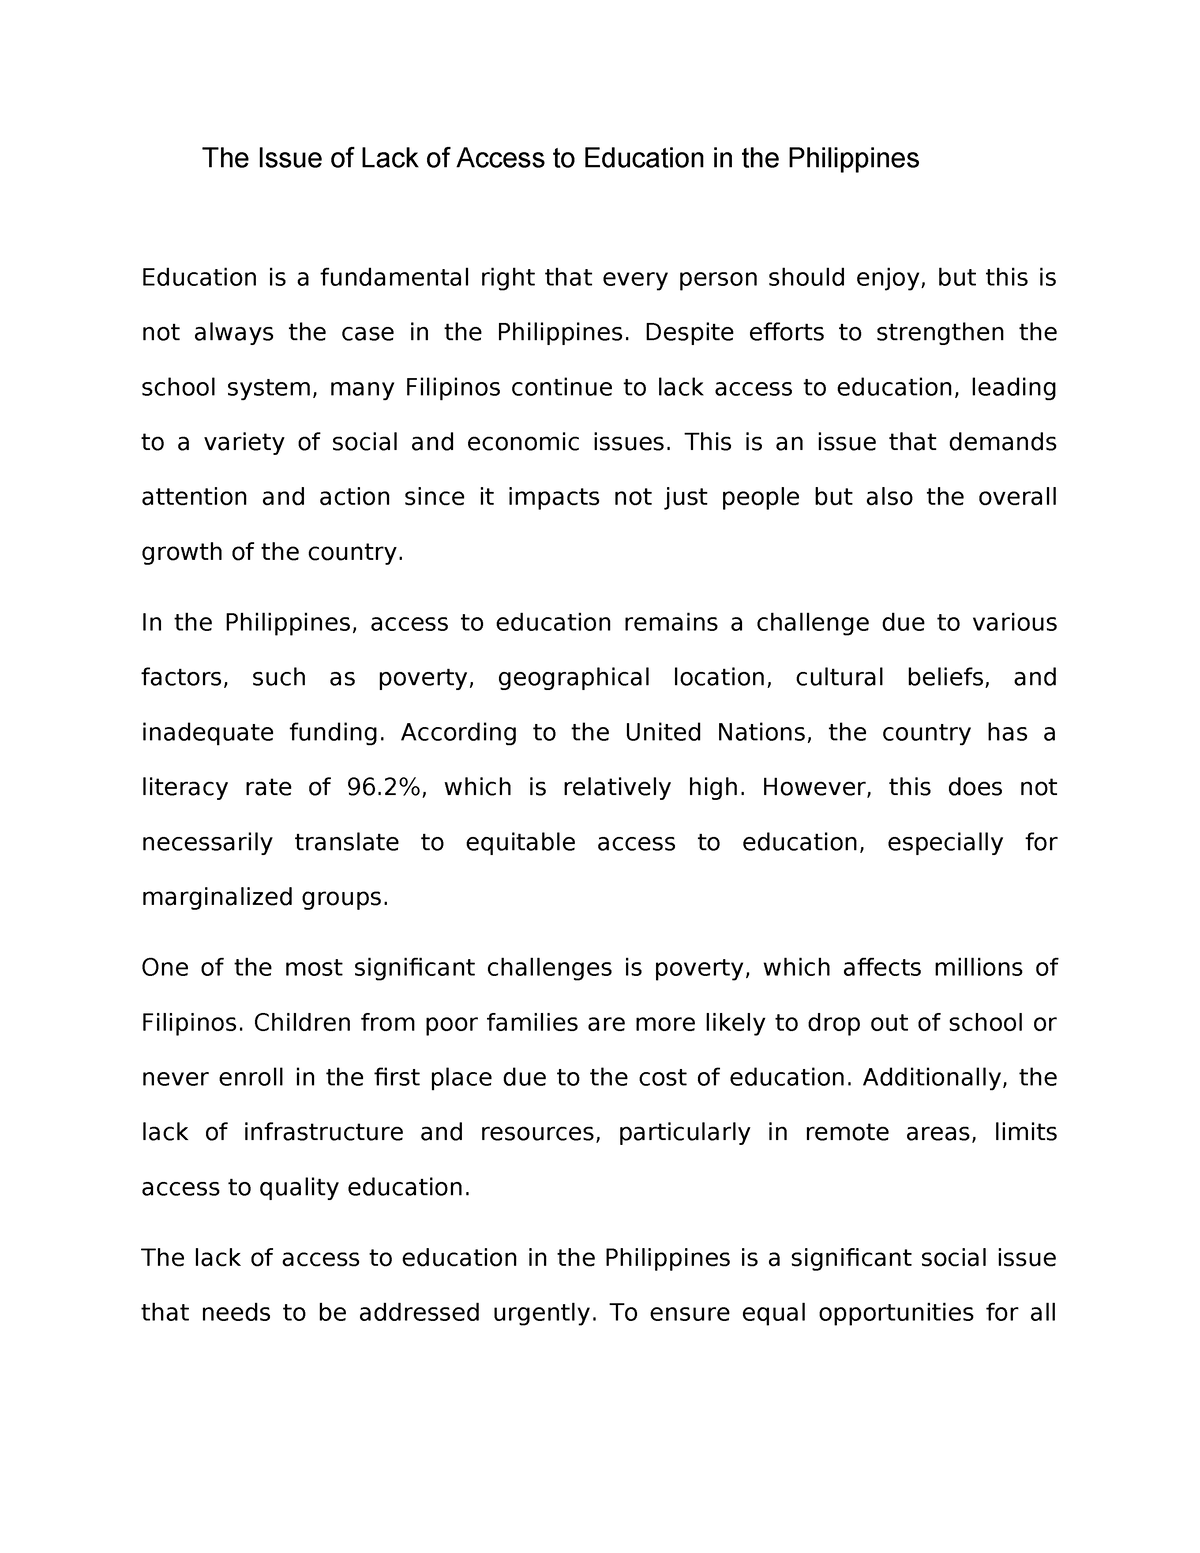 essay about lack of education in philippines